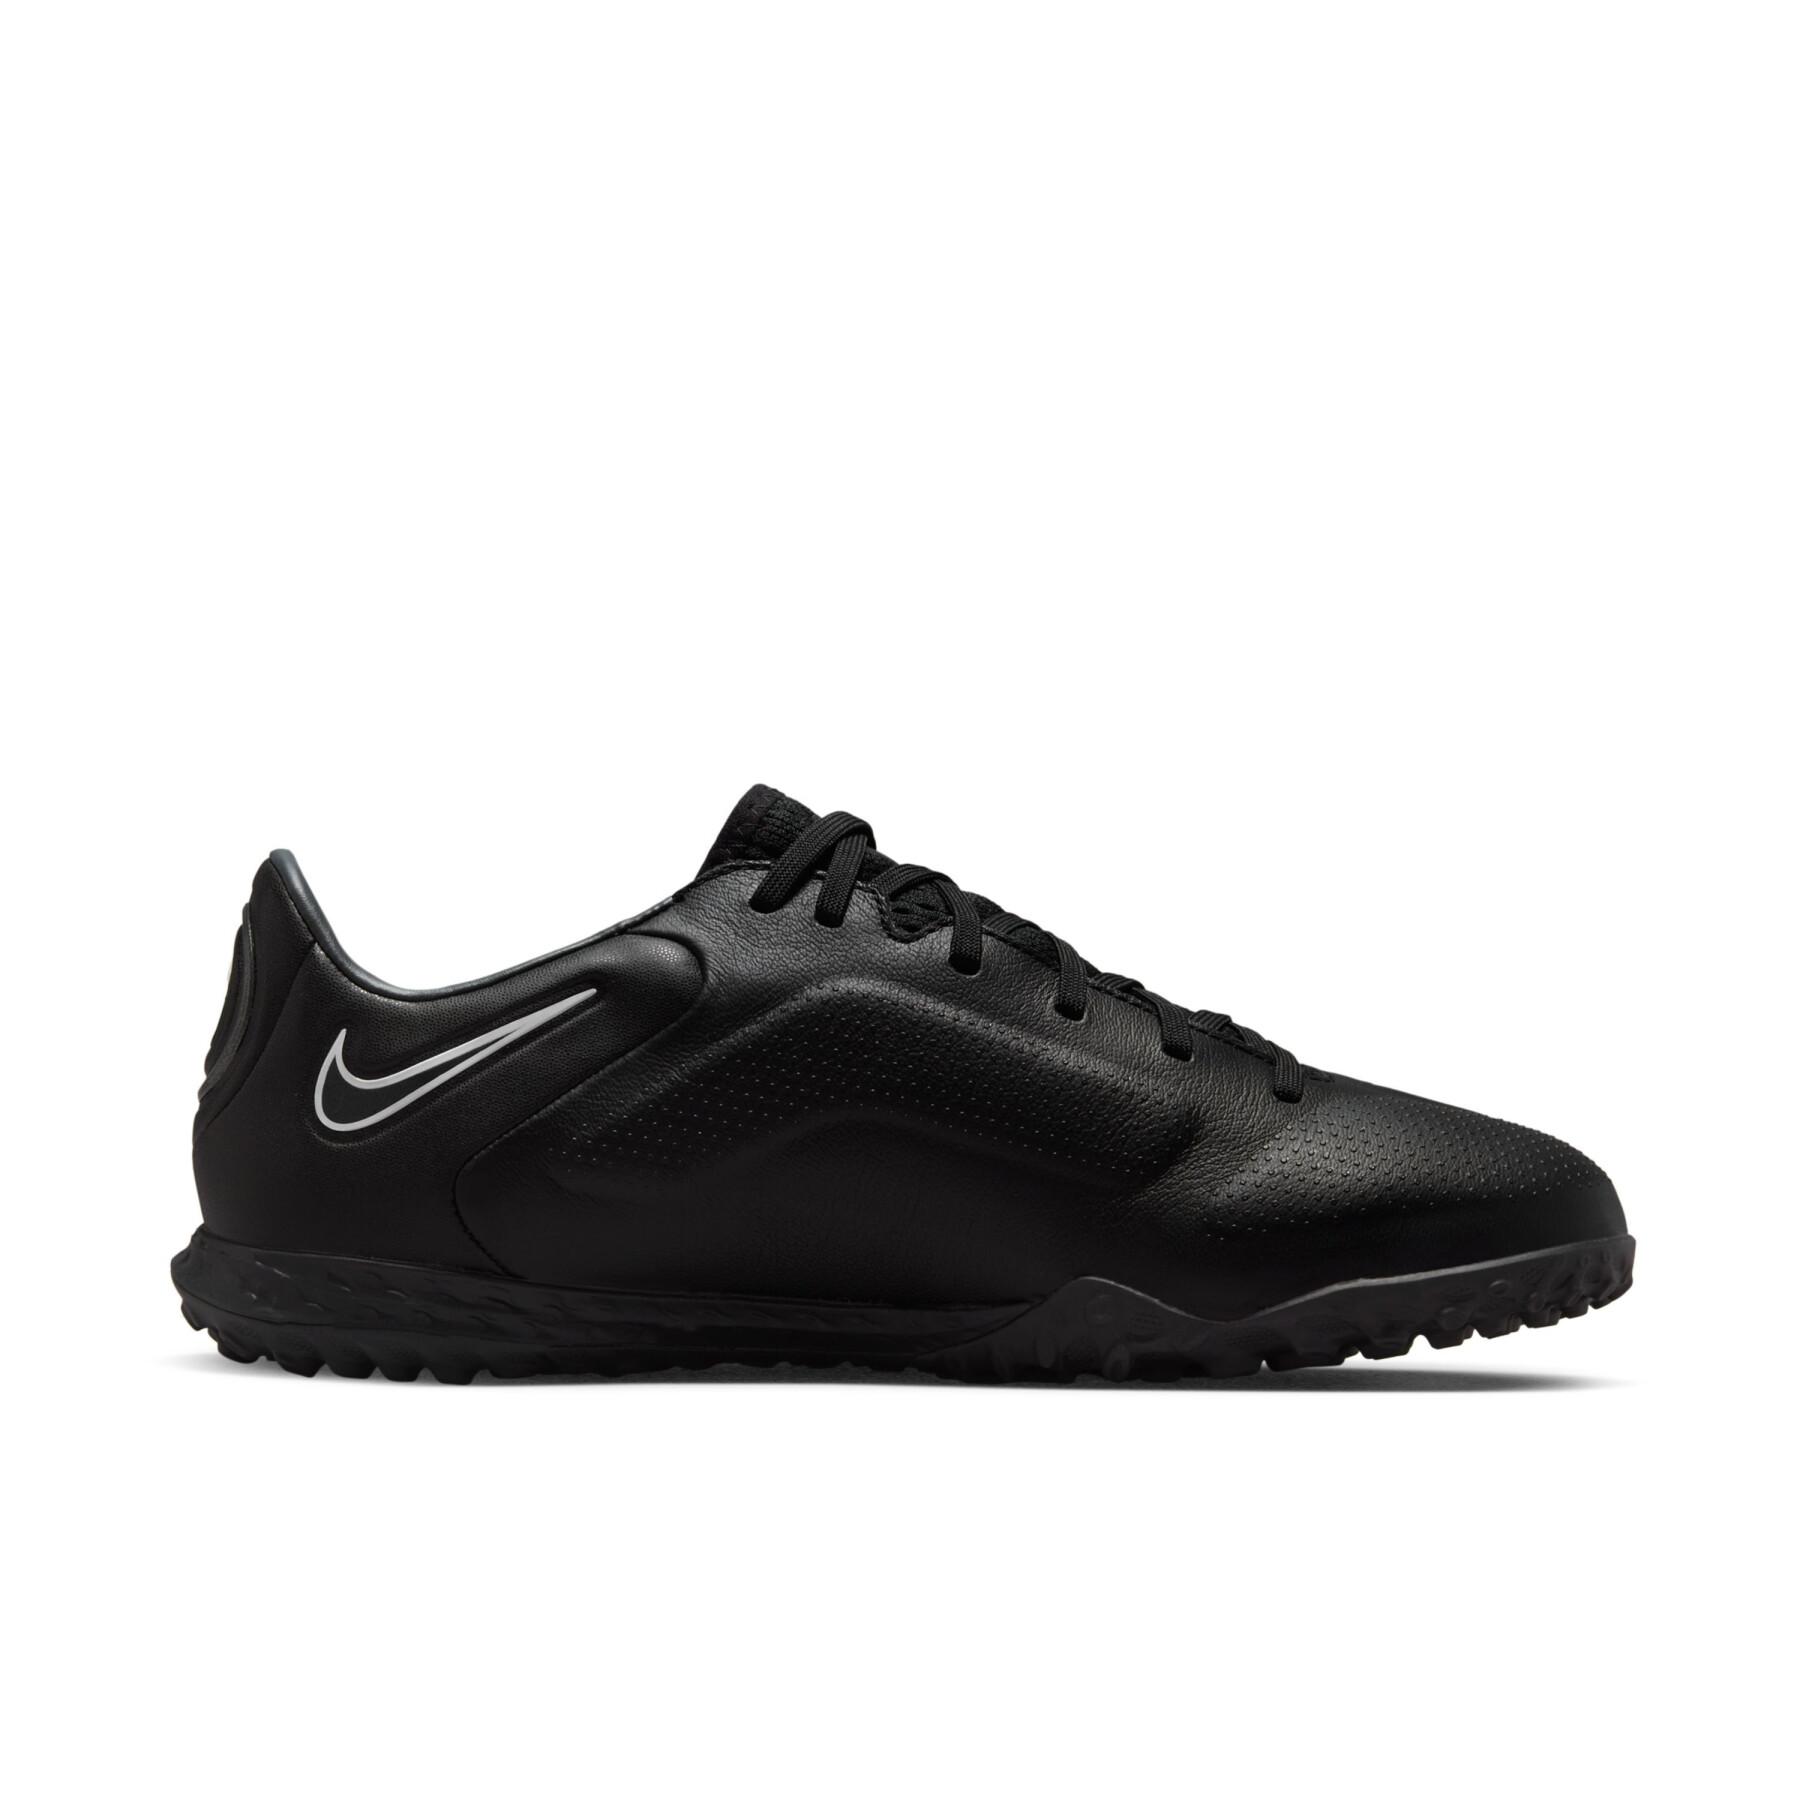 Soccer shoes Nike React Tiempo Legend 9 Pro TF - Shadow Black Pack